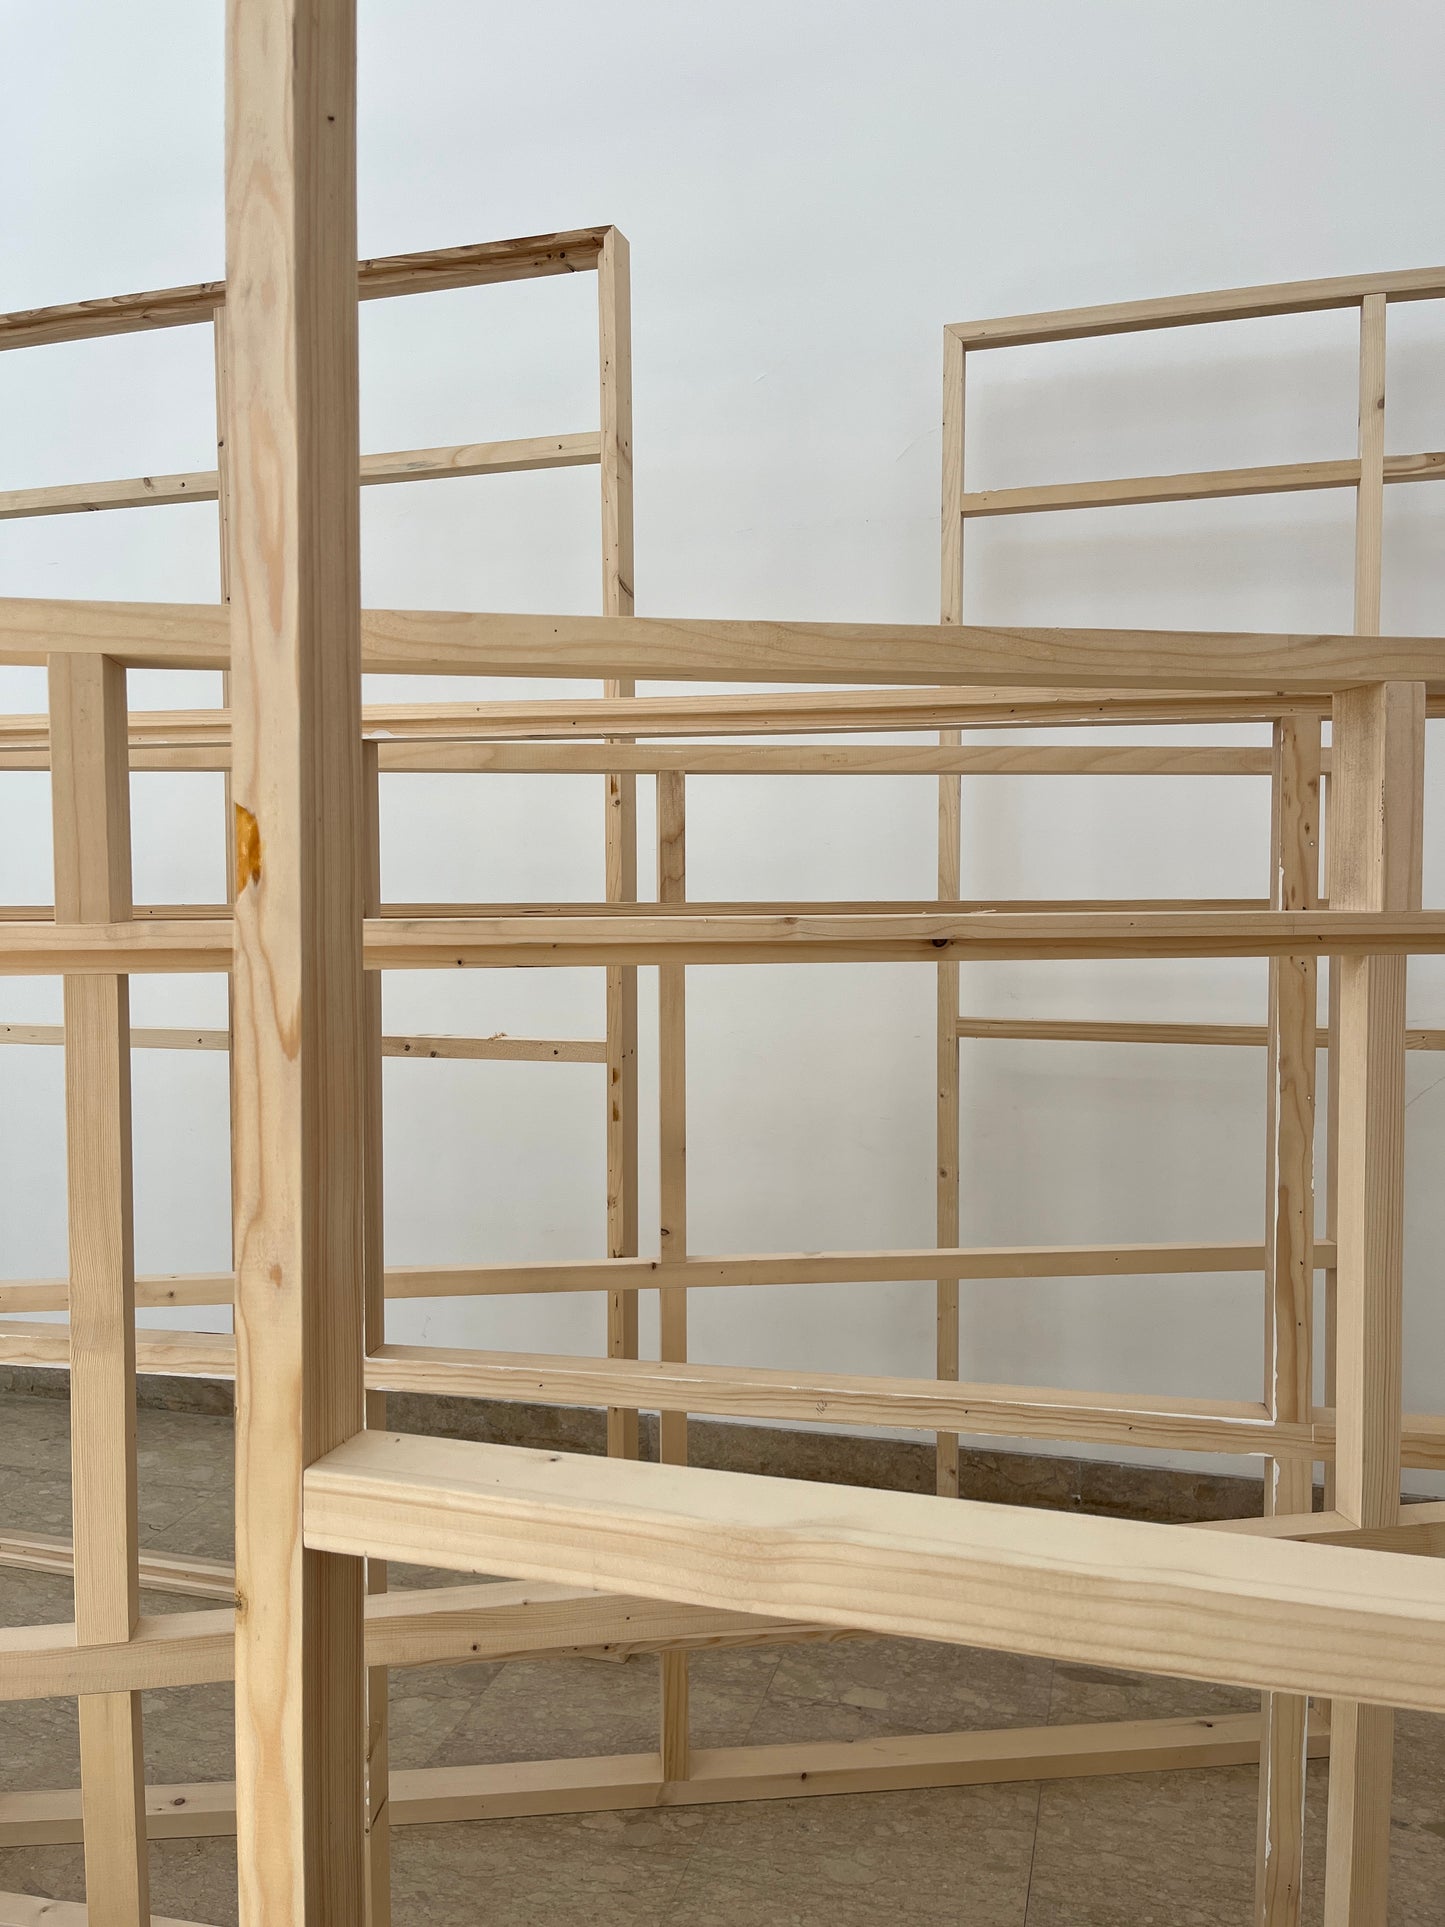 USED UP | Central Pavilion Arsenale | Wooden House, 4.12.1